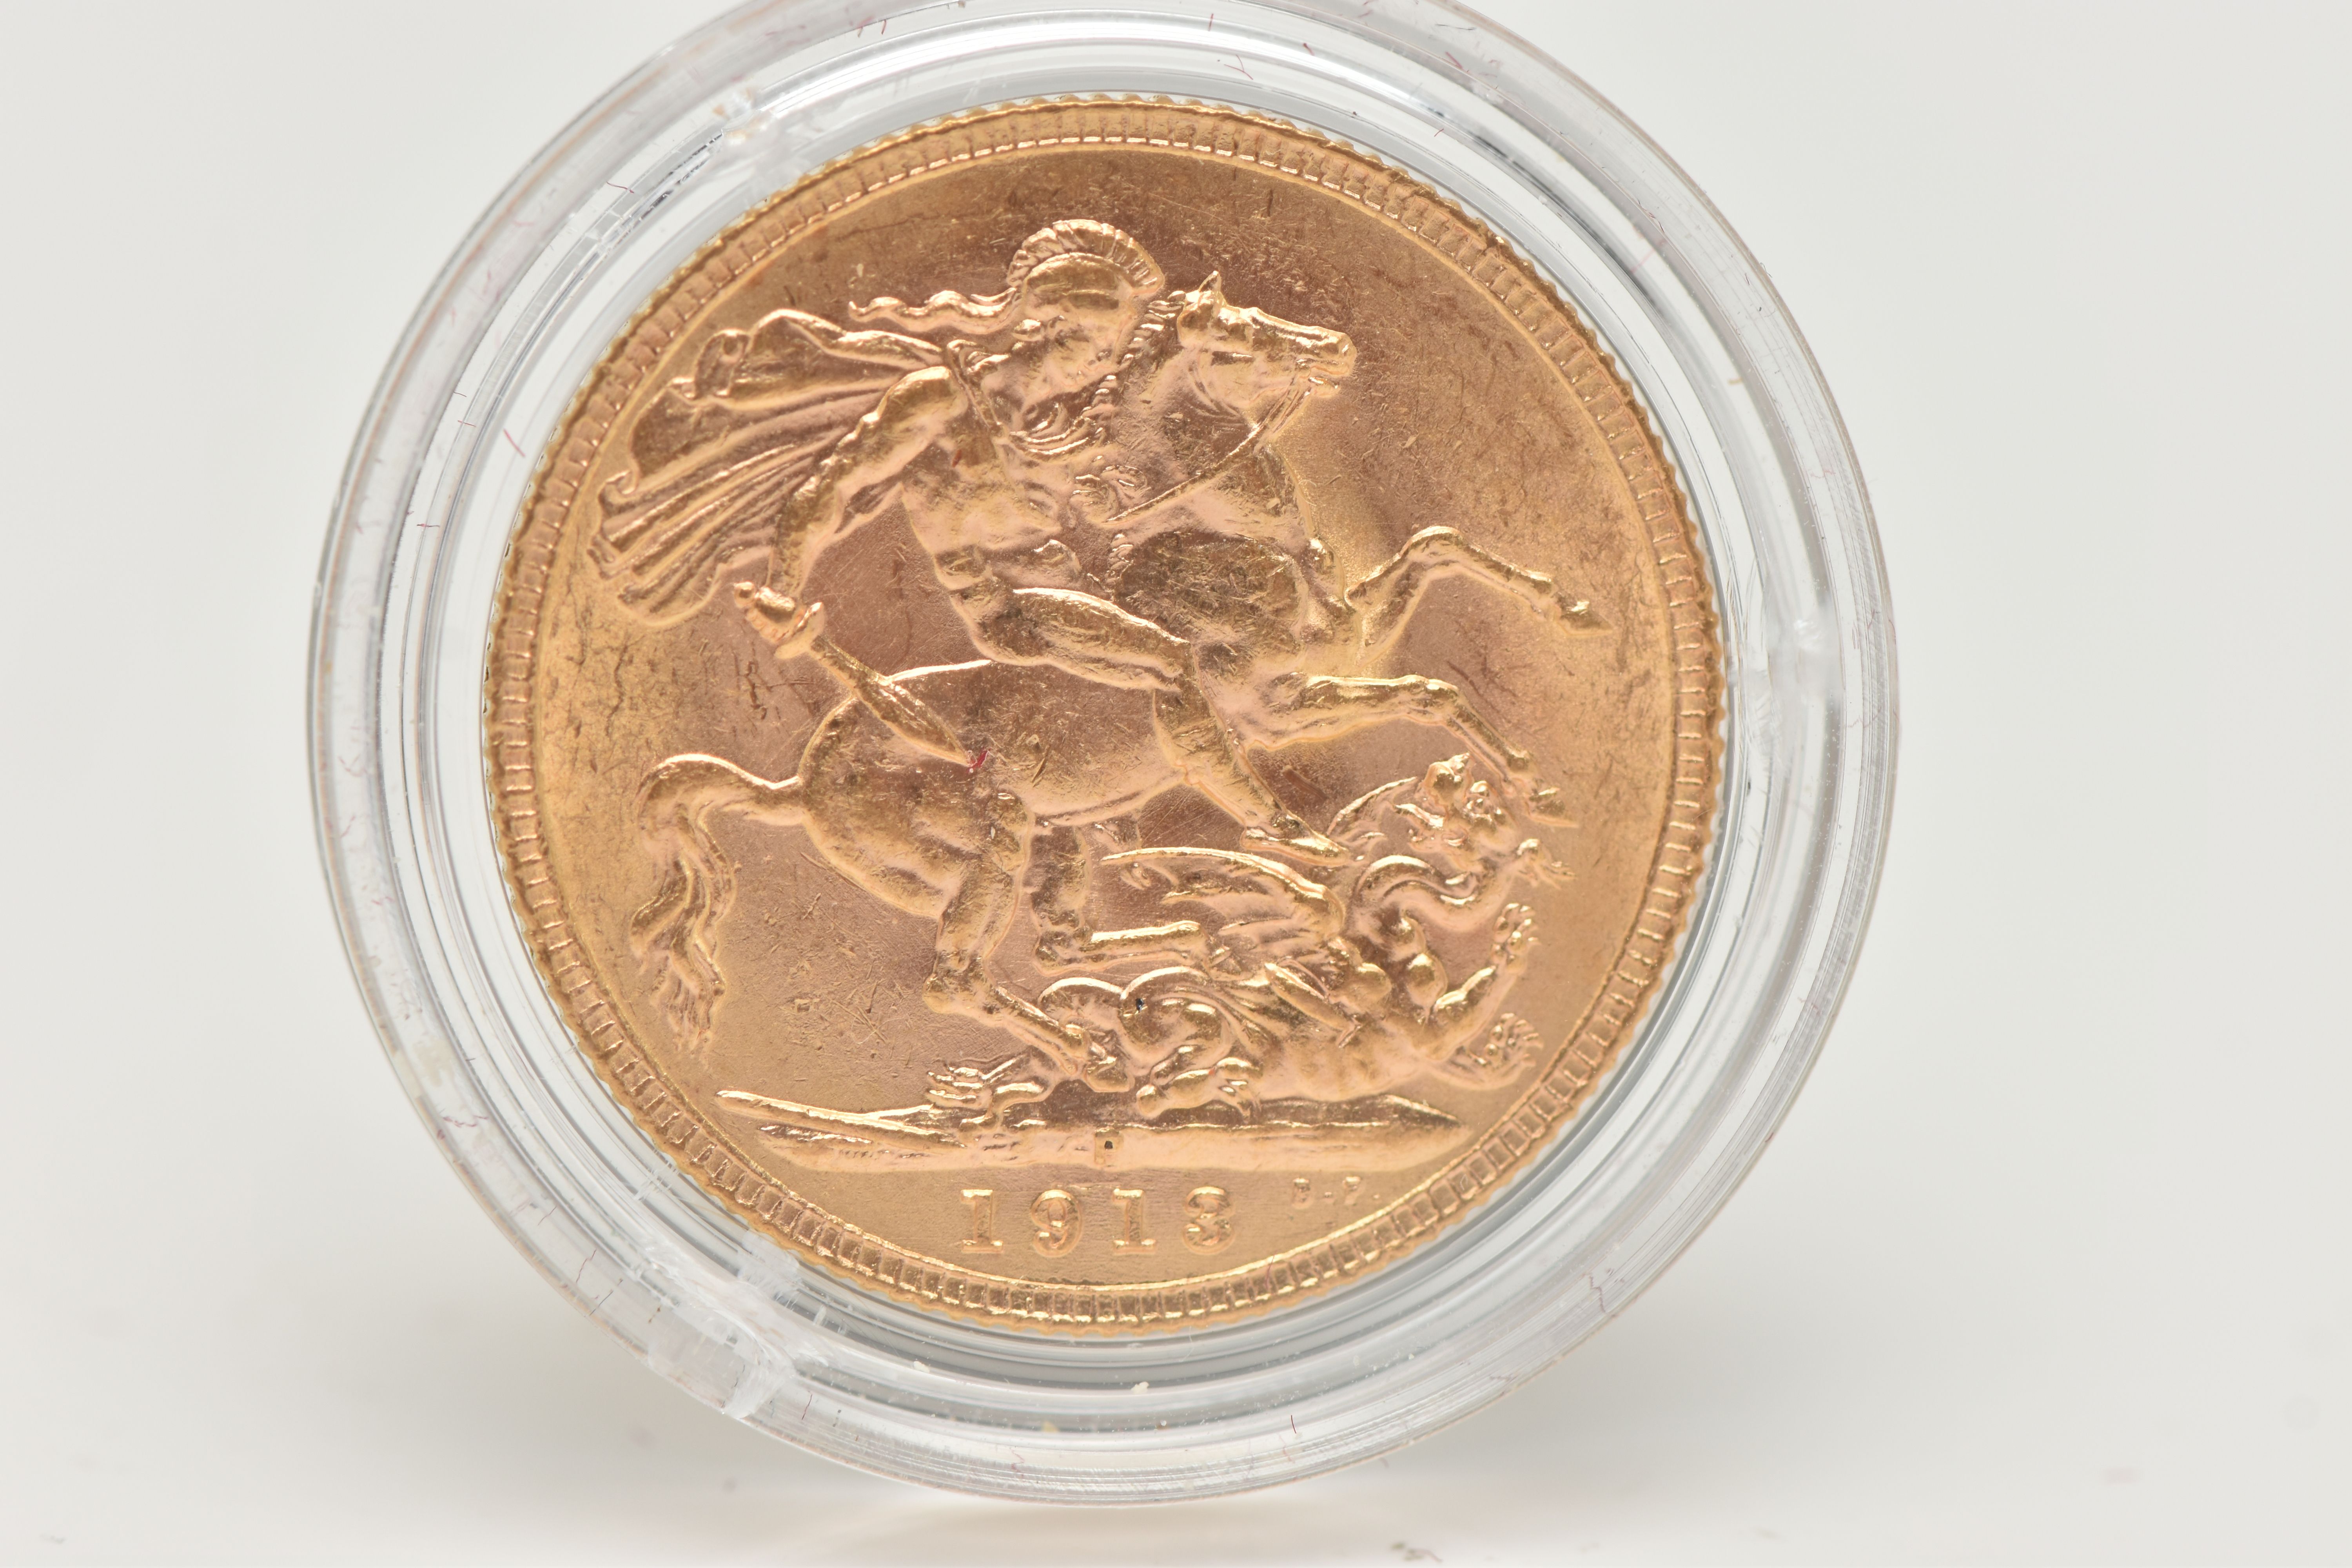 A FULL 22CT GOLD SOVEREIGN COIN 1913 PERTH MINT GEORGE V, 7.98 grams, .916 fine, 22.05mm